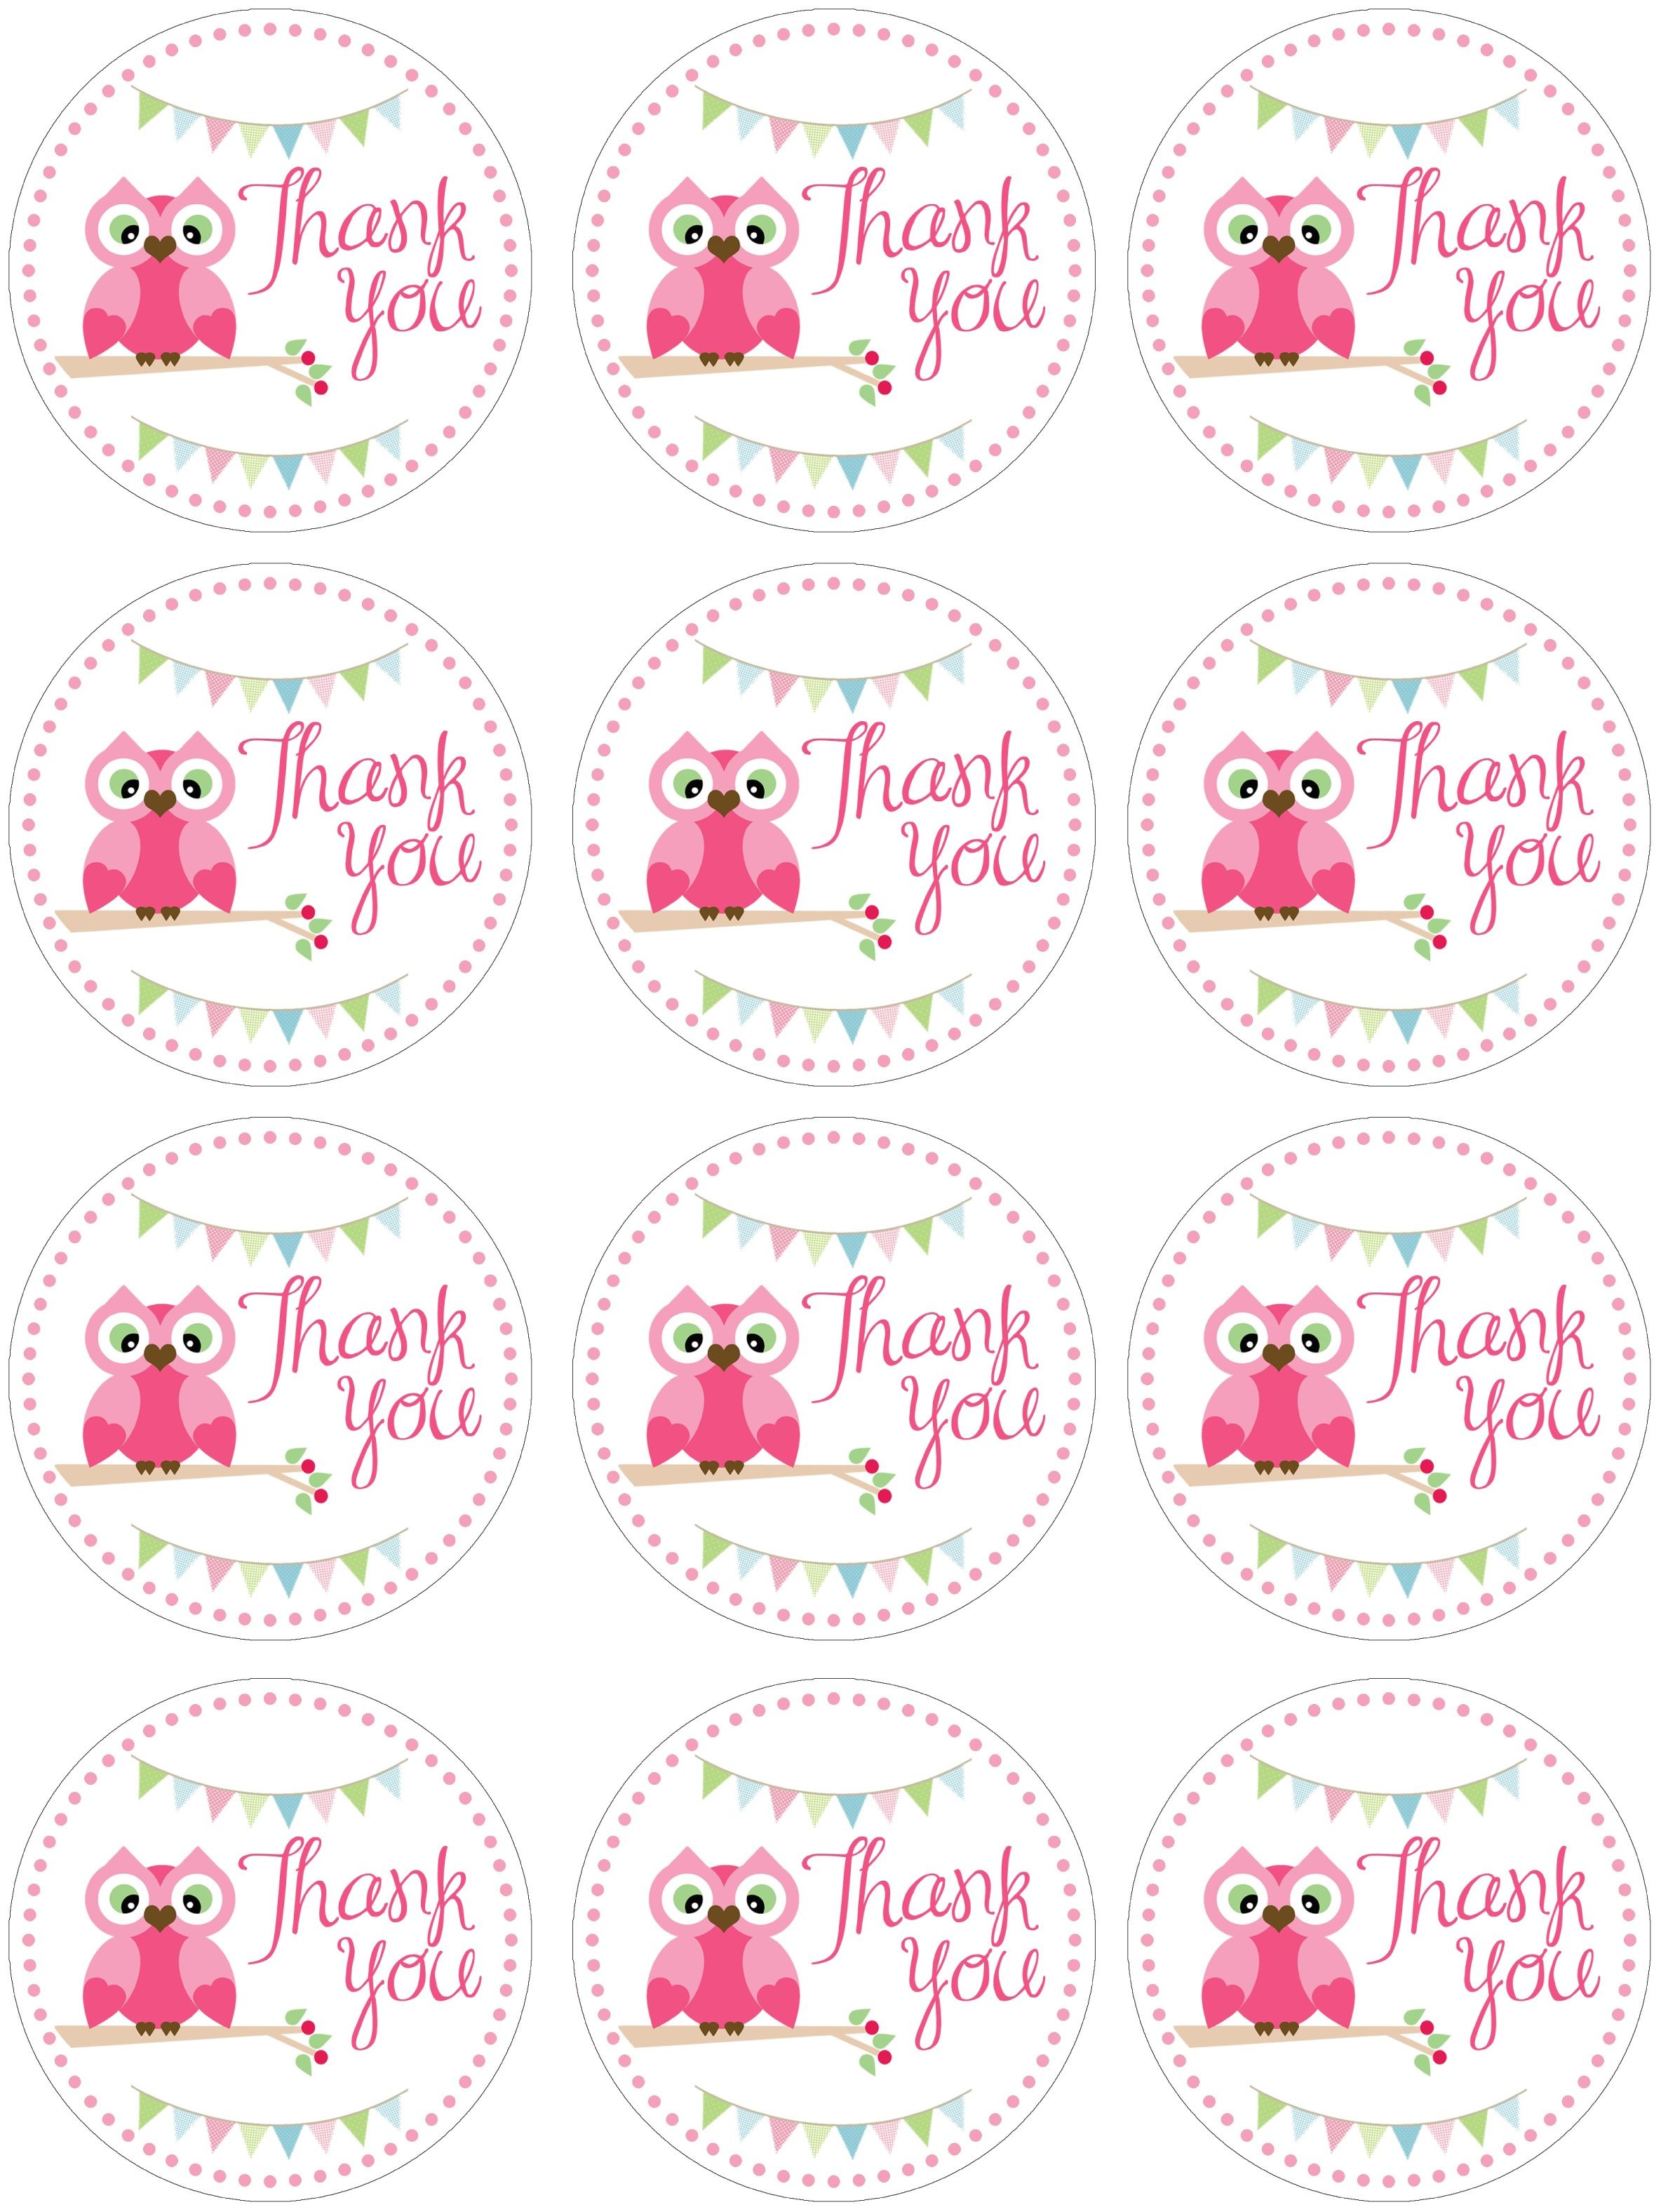 Owl Birthday Party With Free Printables | Cabochon | Pinterest - Free Printable Thank You Tags For Birthday Favors